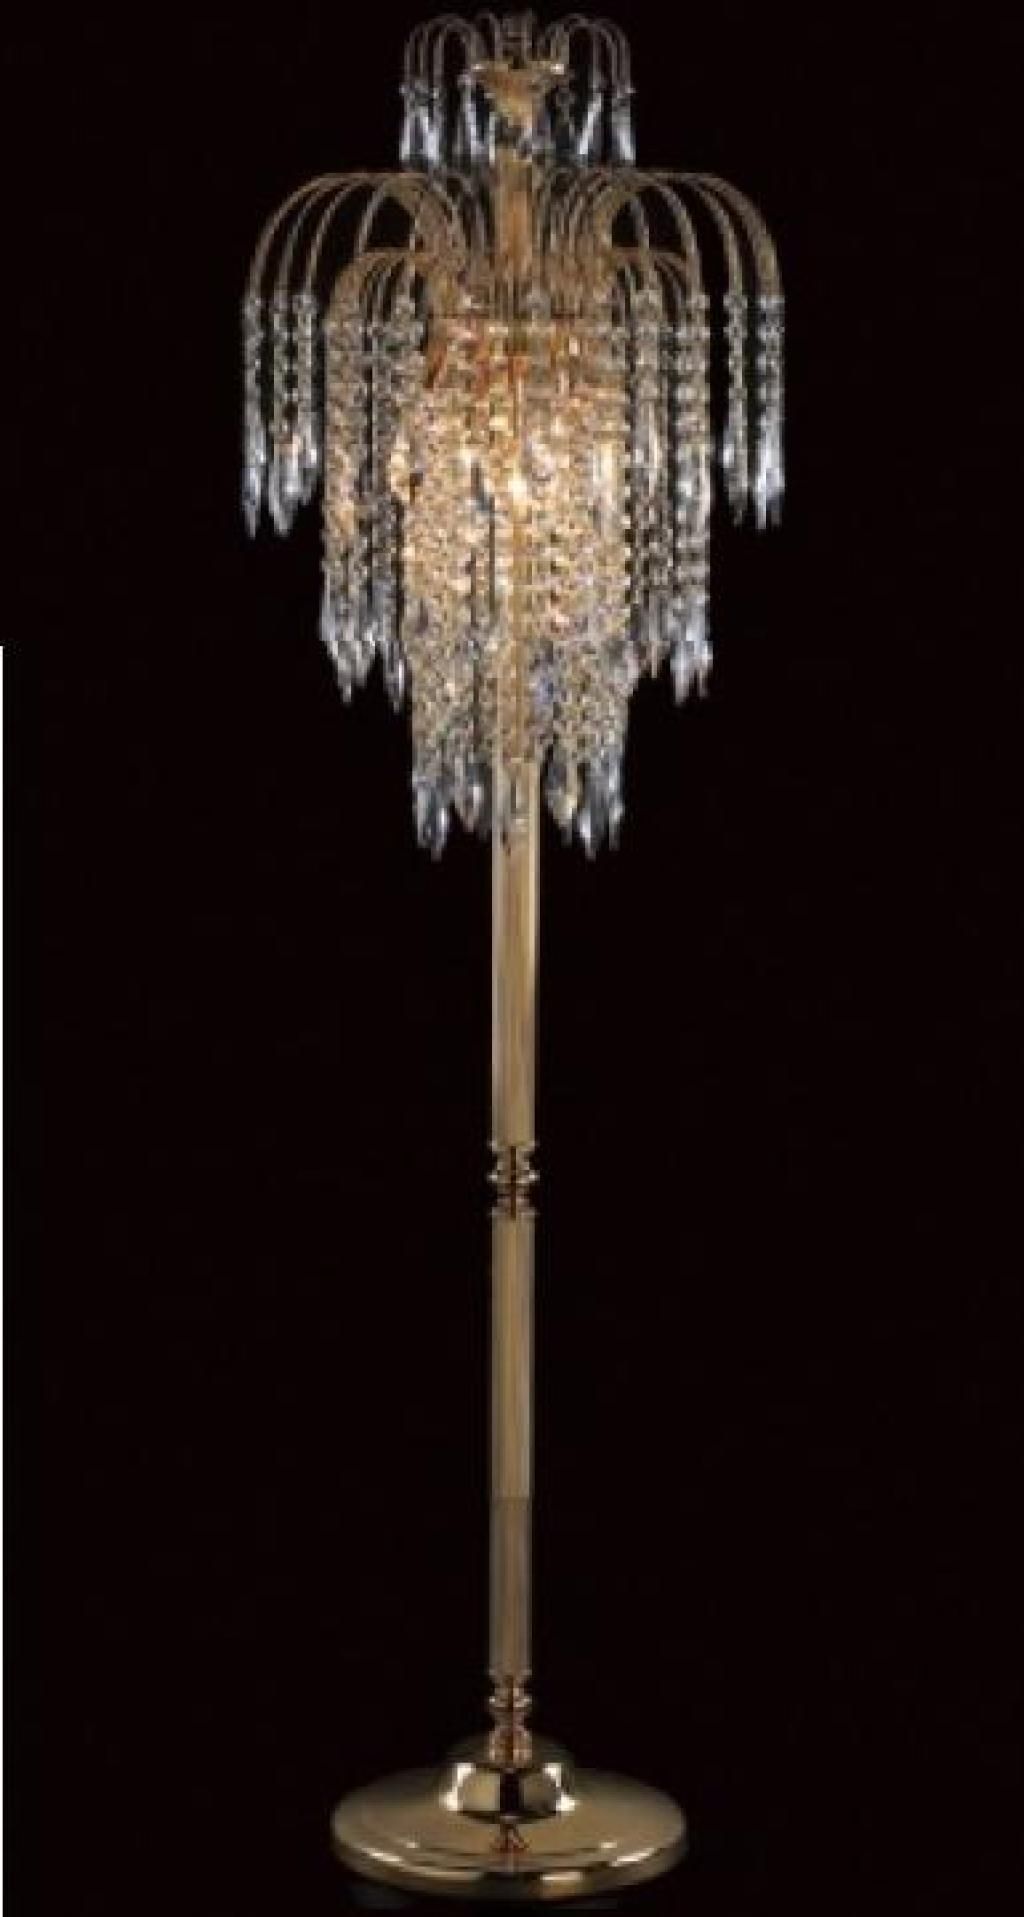 46 Chandelier Lamps Marie Therese Glass Crystal Chandelier 5 Arm Throughout Weird Chandeliers (View 8 of 12)